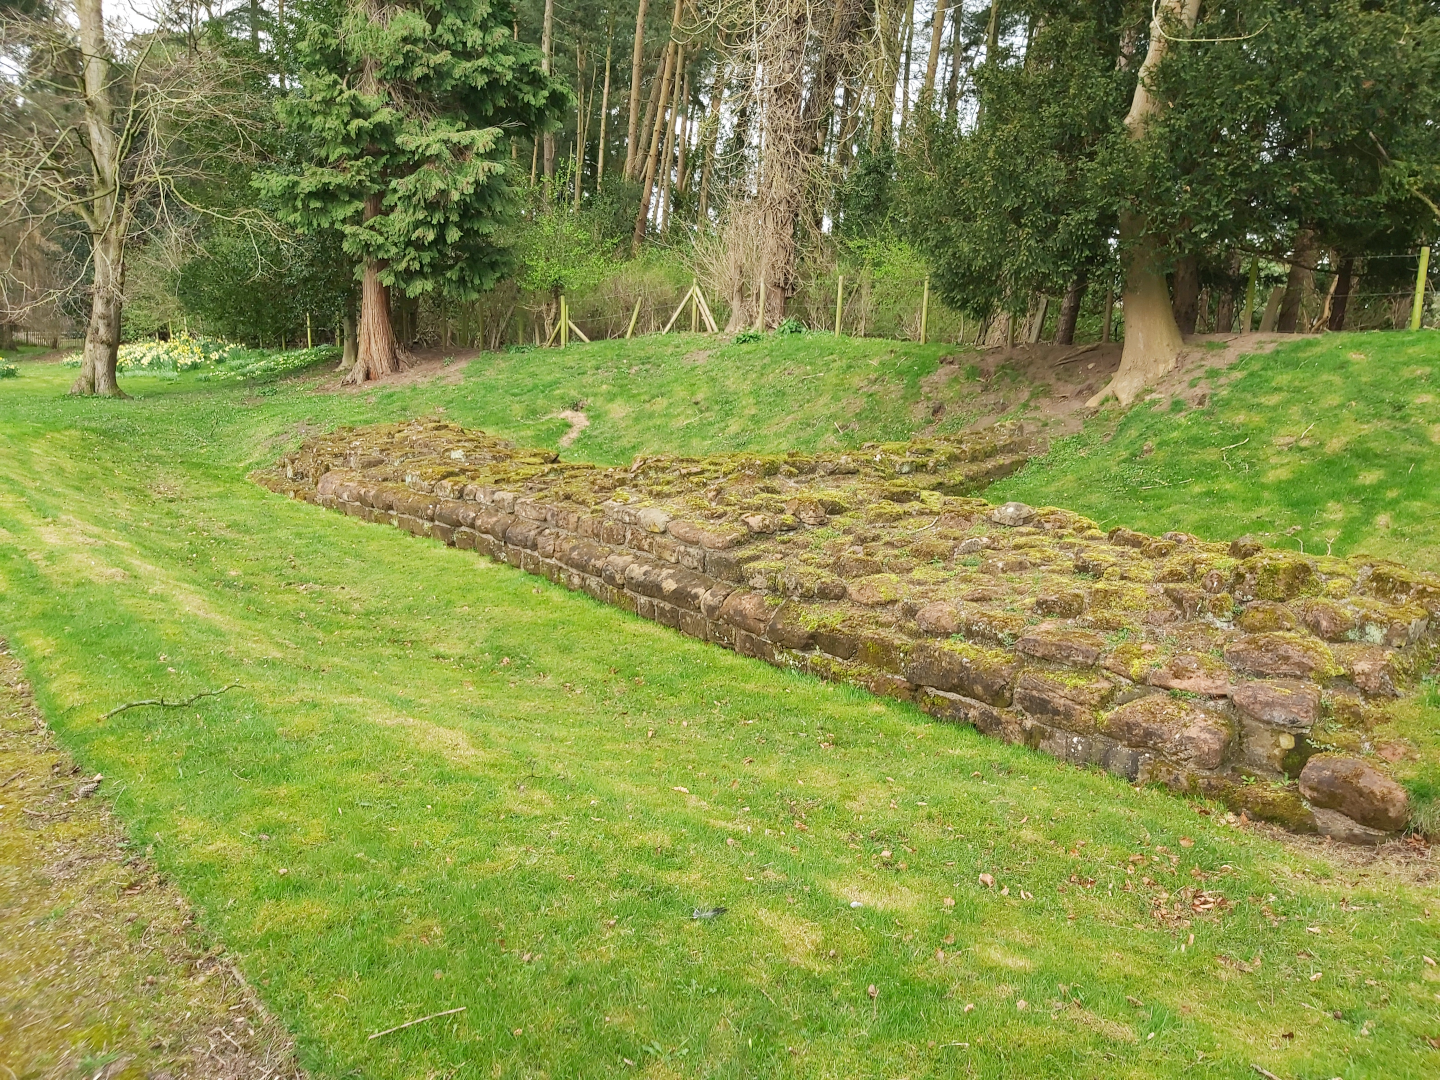 A colour photo showing the base of a stone wall bordered by grass banks - there are three courses of stonework making up the remains of this wall, and these are covered in low level weeds and moss - in the background there is a dense area of mature trees